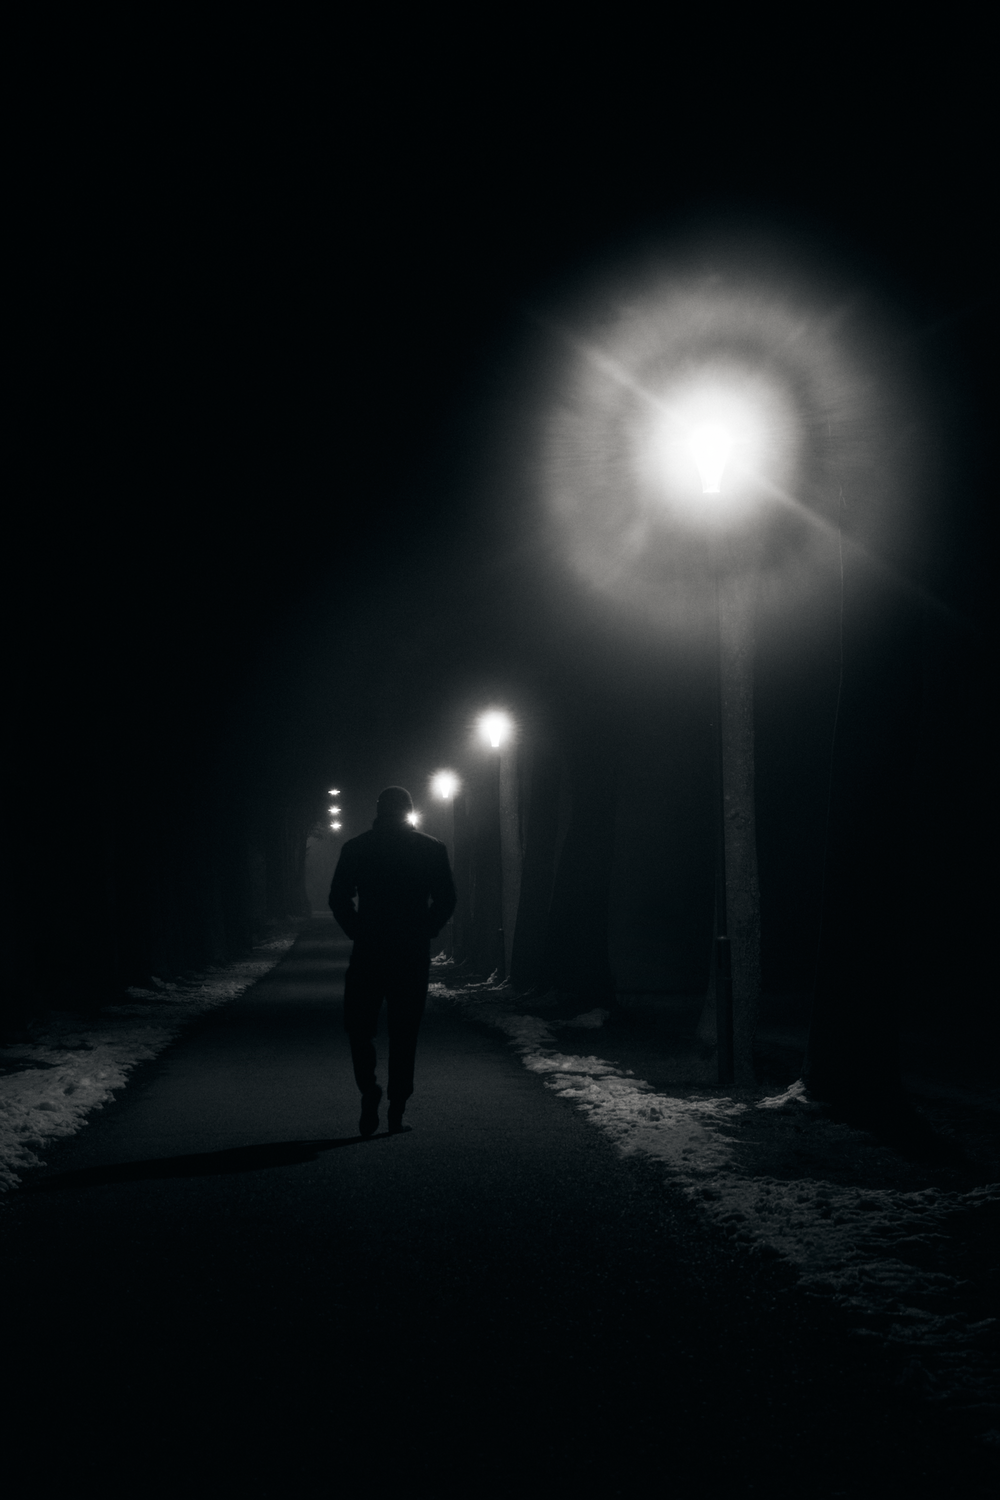 Walking Alone Picture. Download Free Image